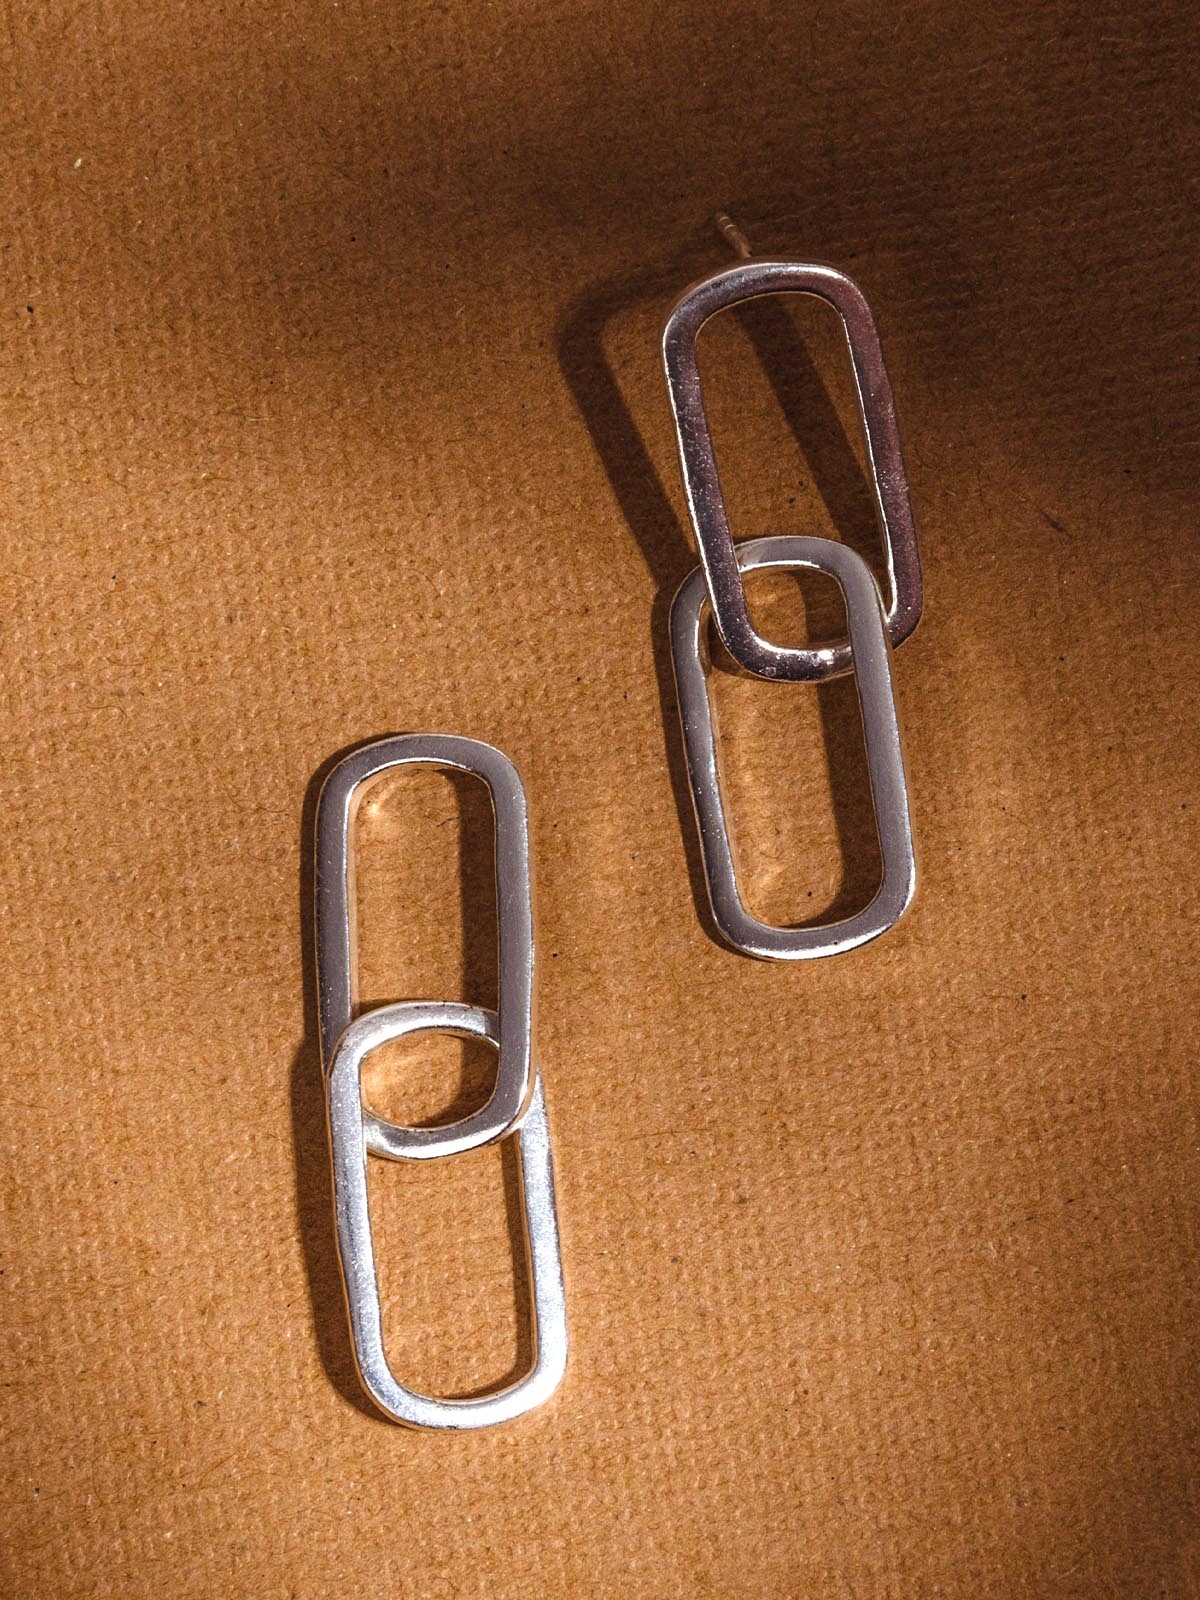 Silver earrings on a brown background